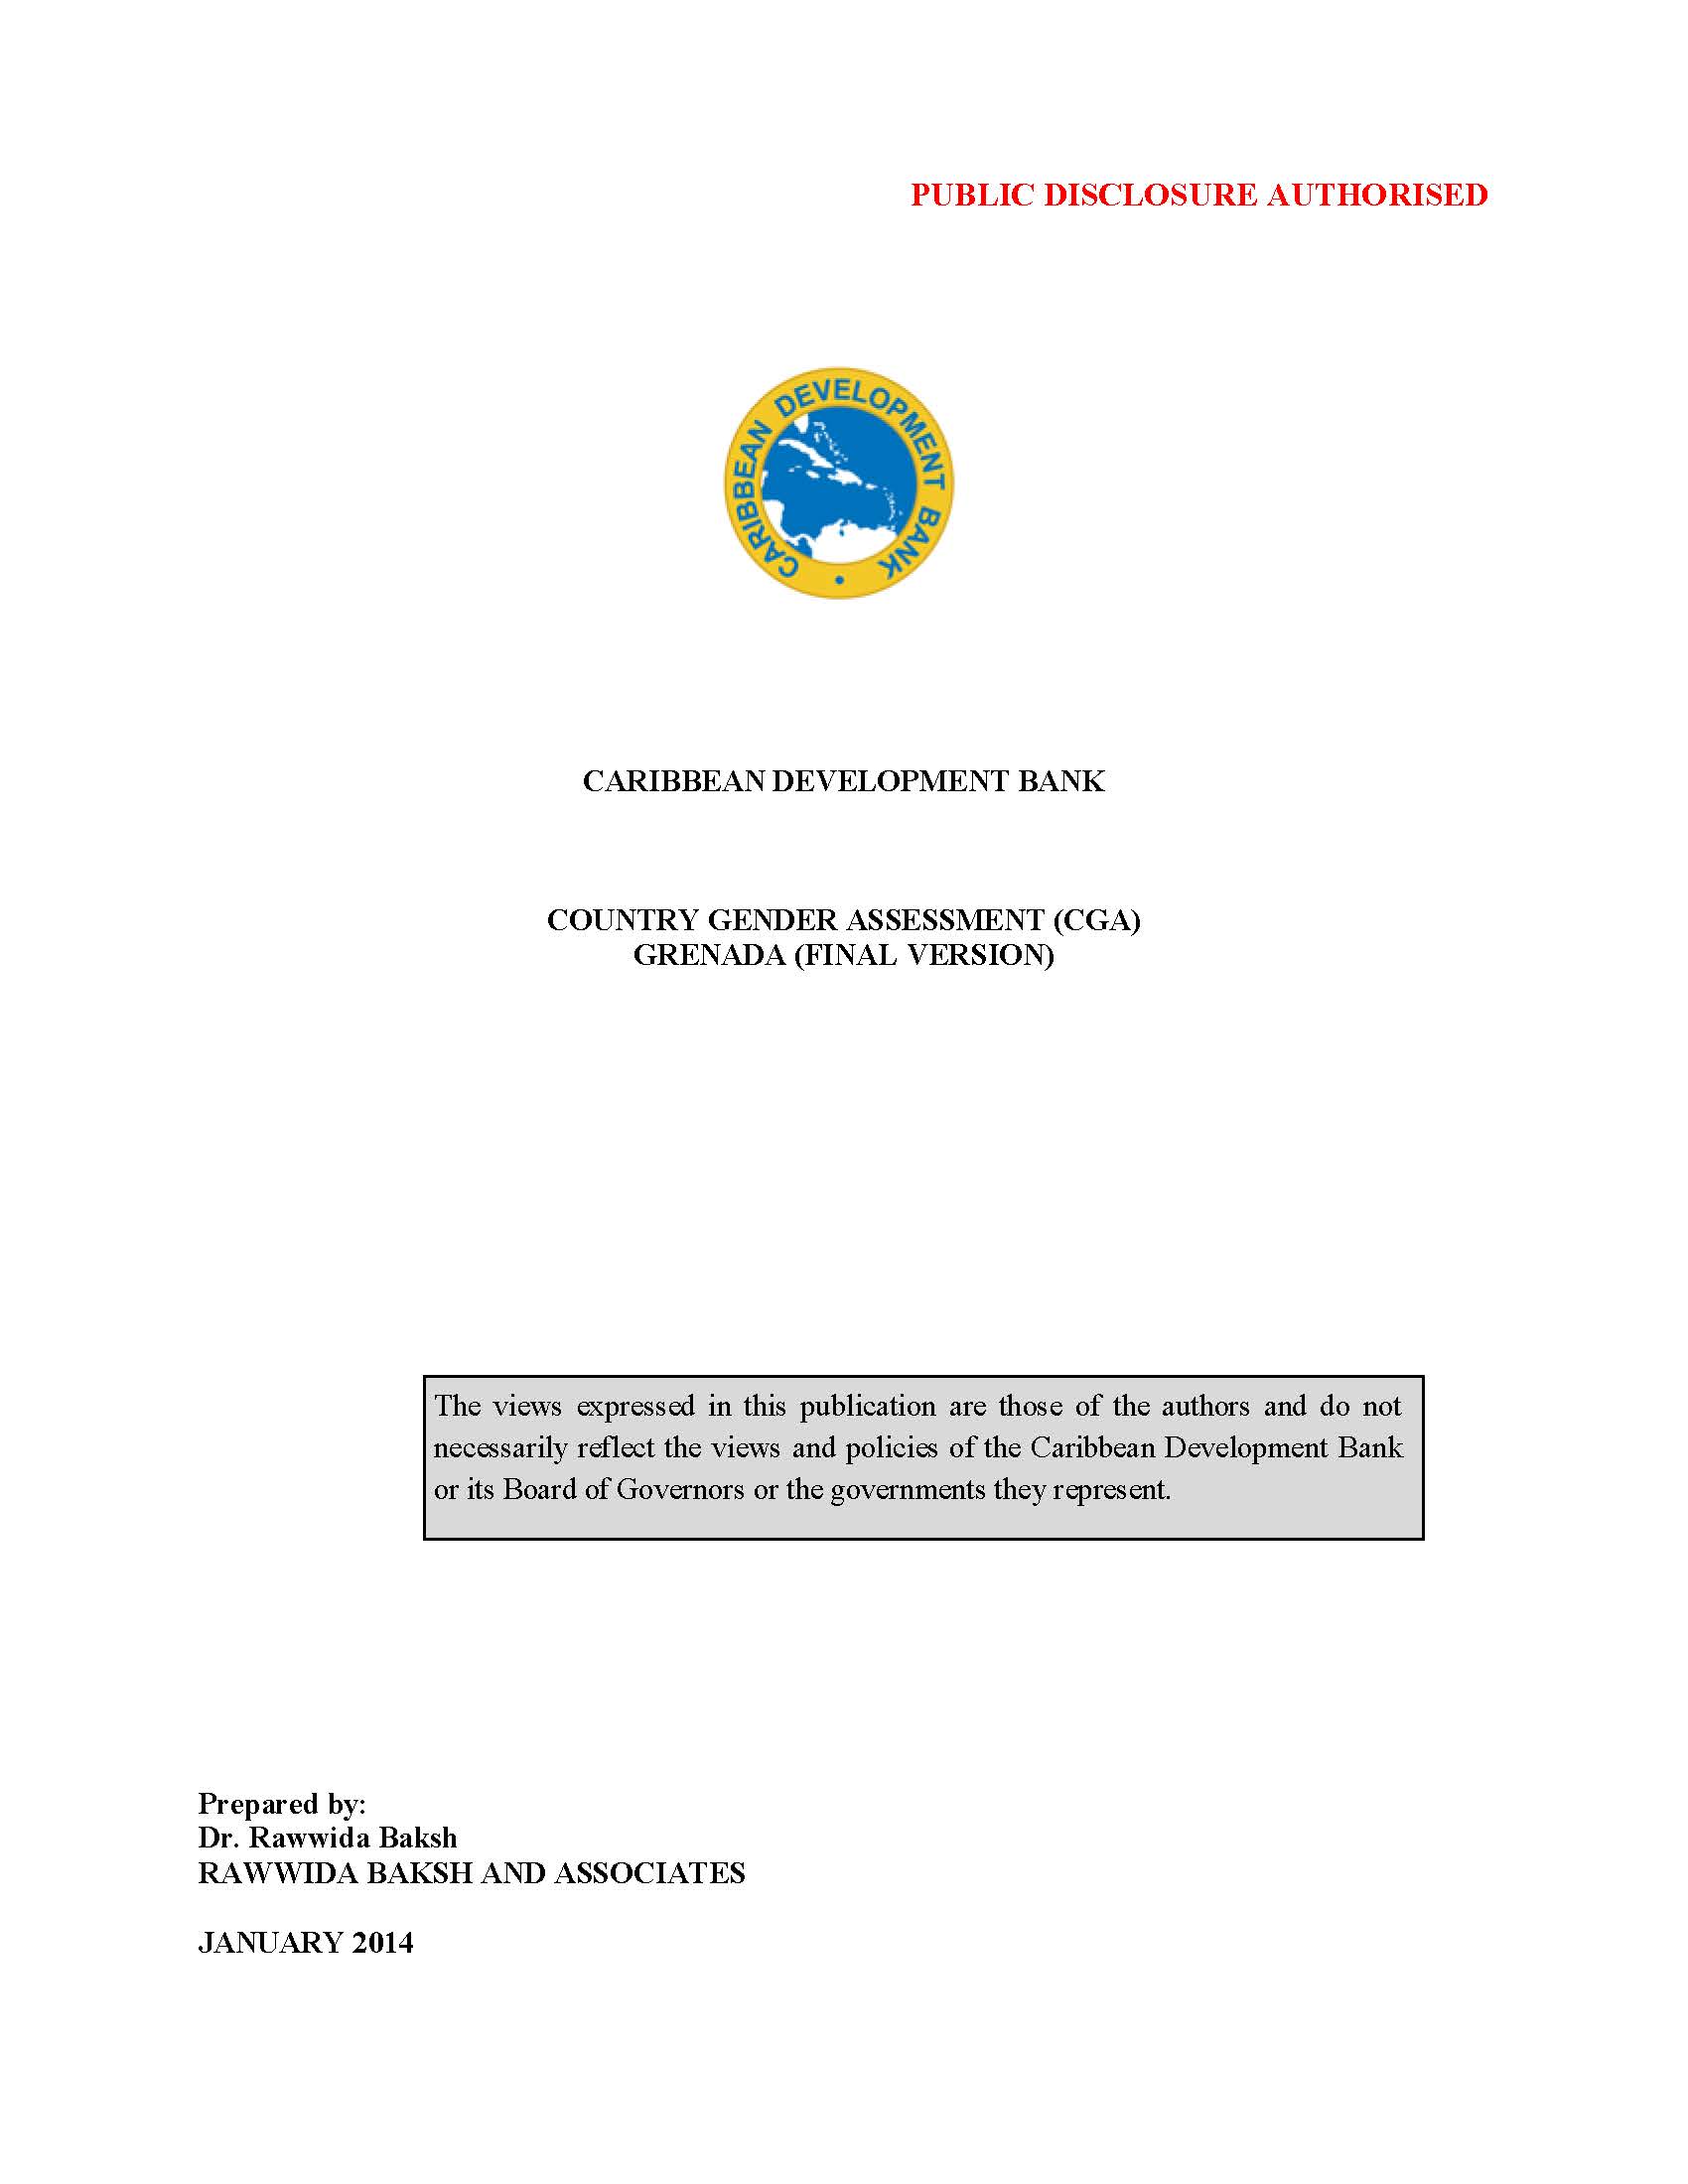 text-based cover featuring document title against a white backdrop